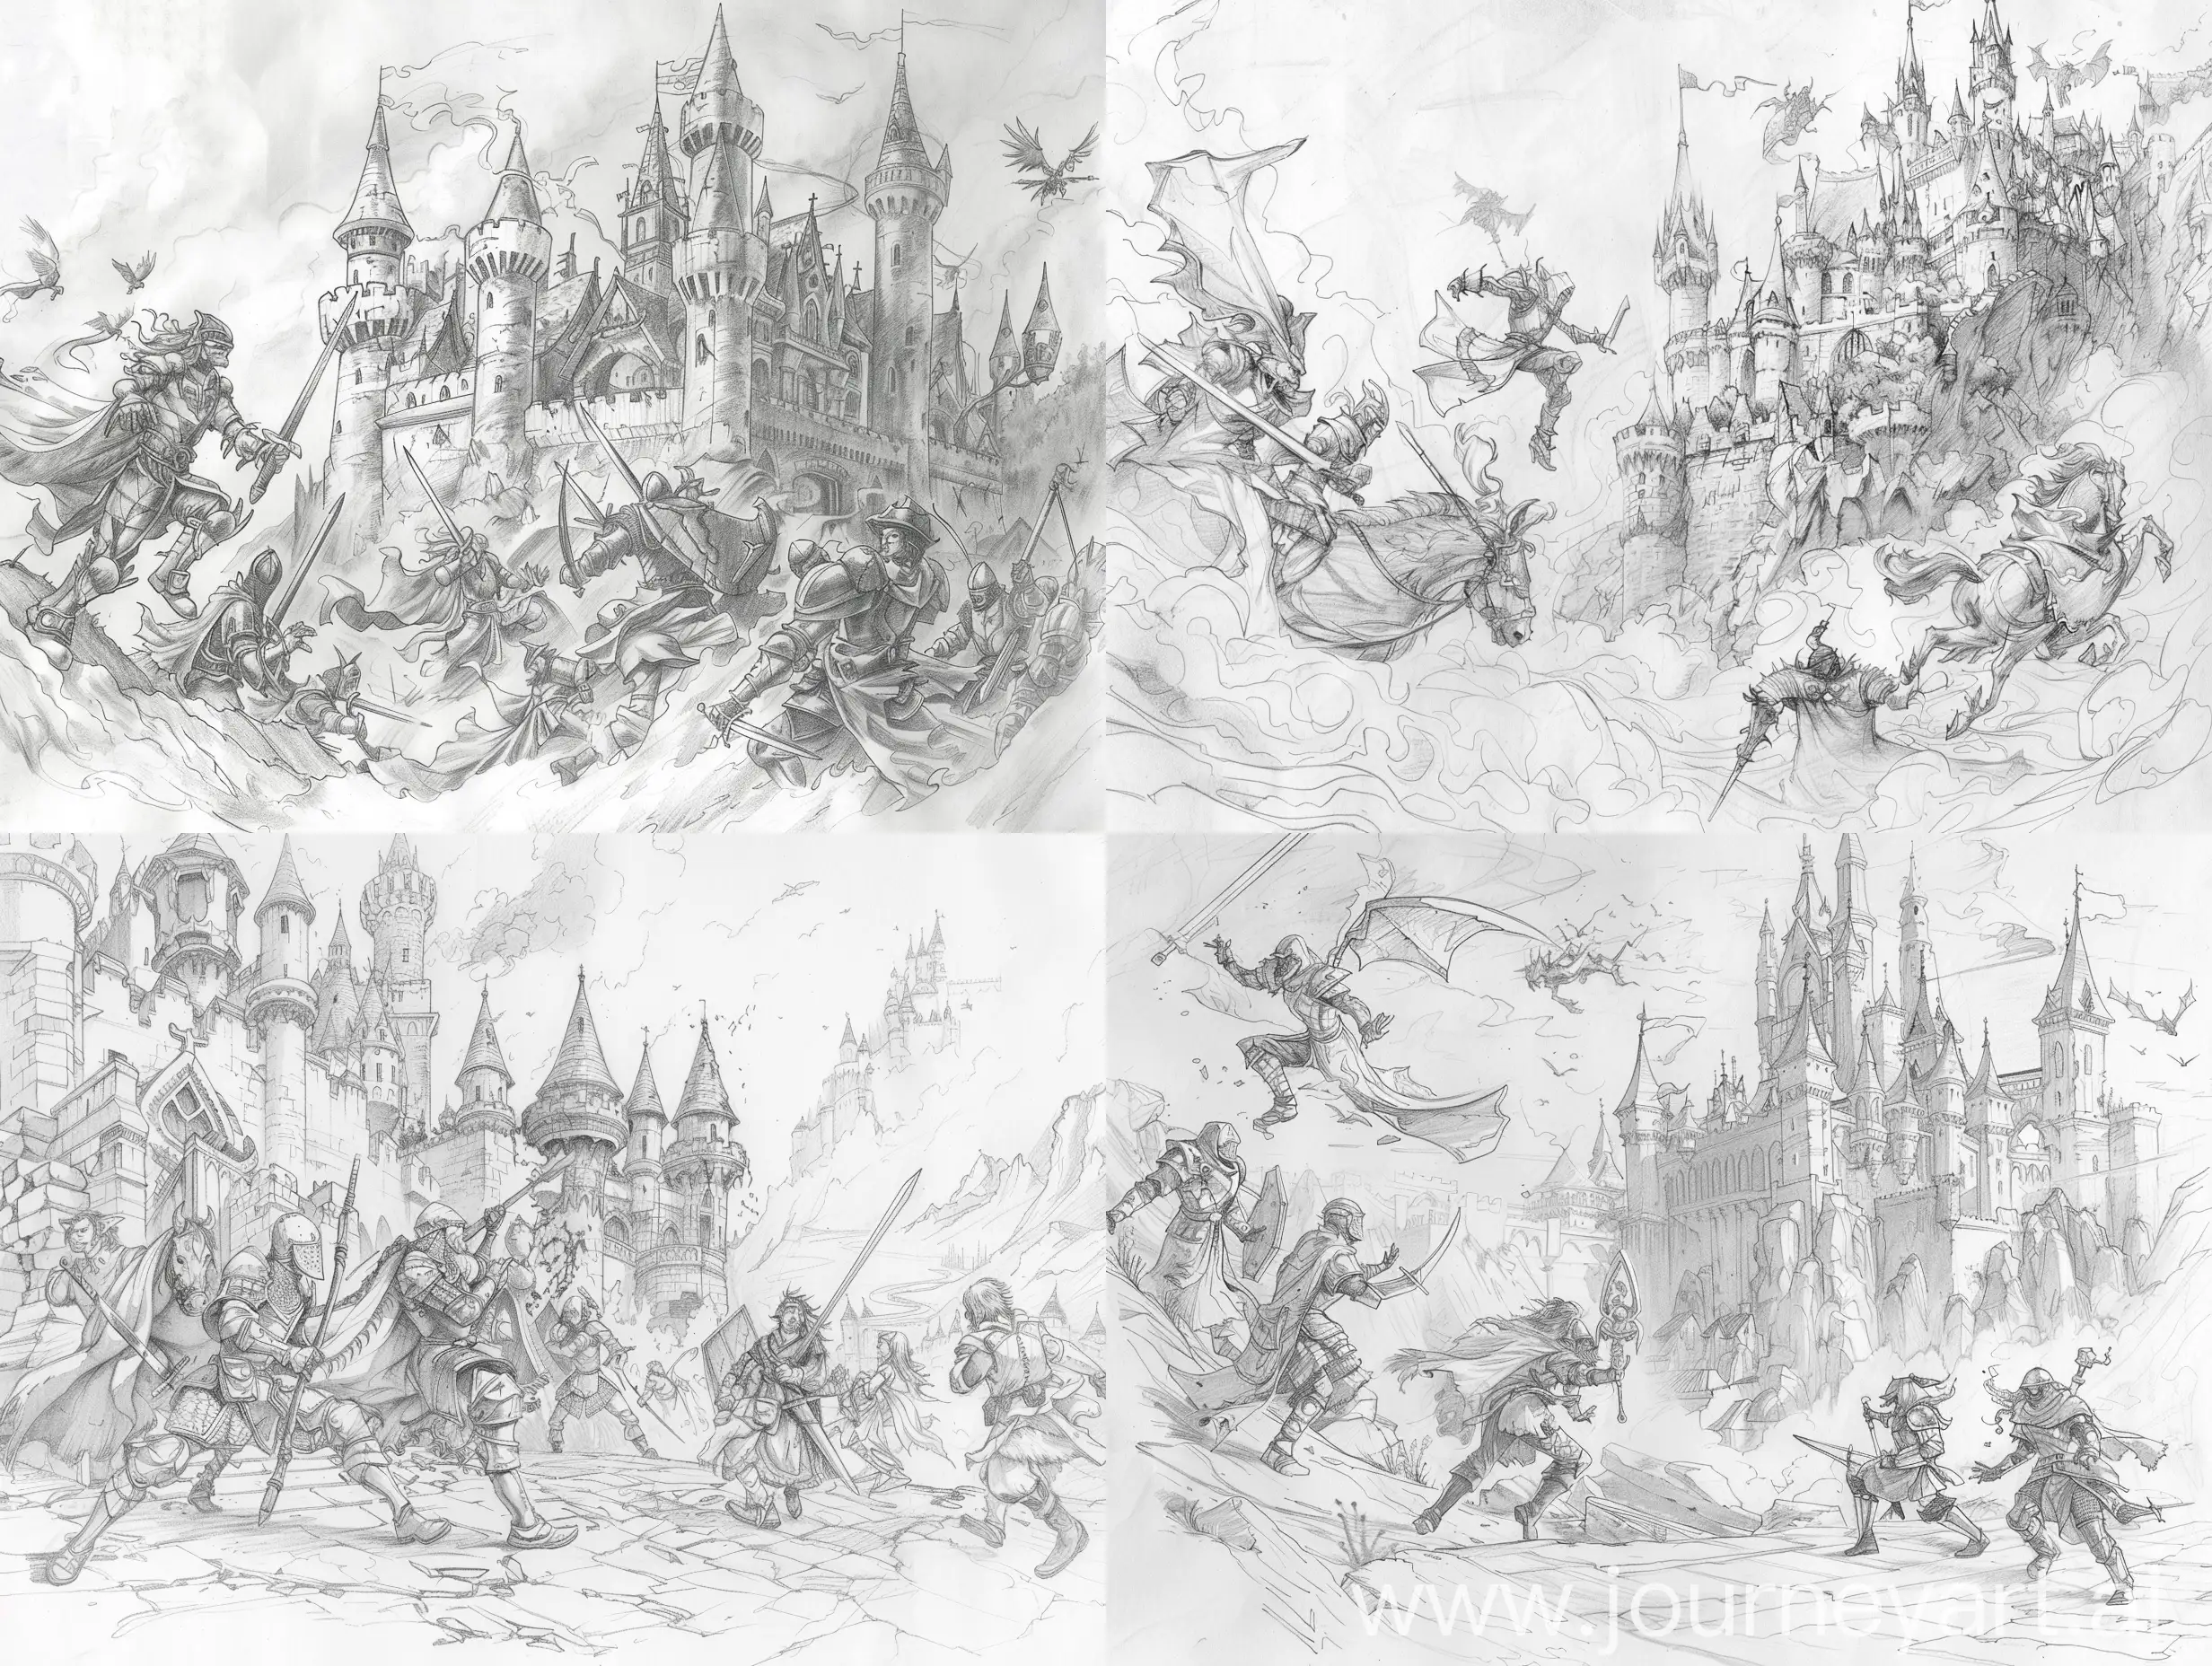 Pencil Sketch of a medieval fantasy scene, characters with dynamic poses, castles in the background